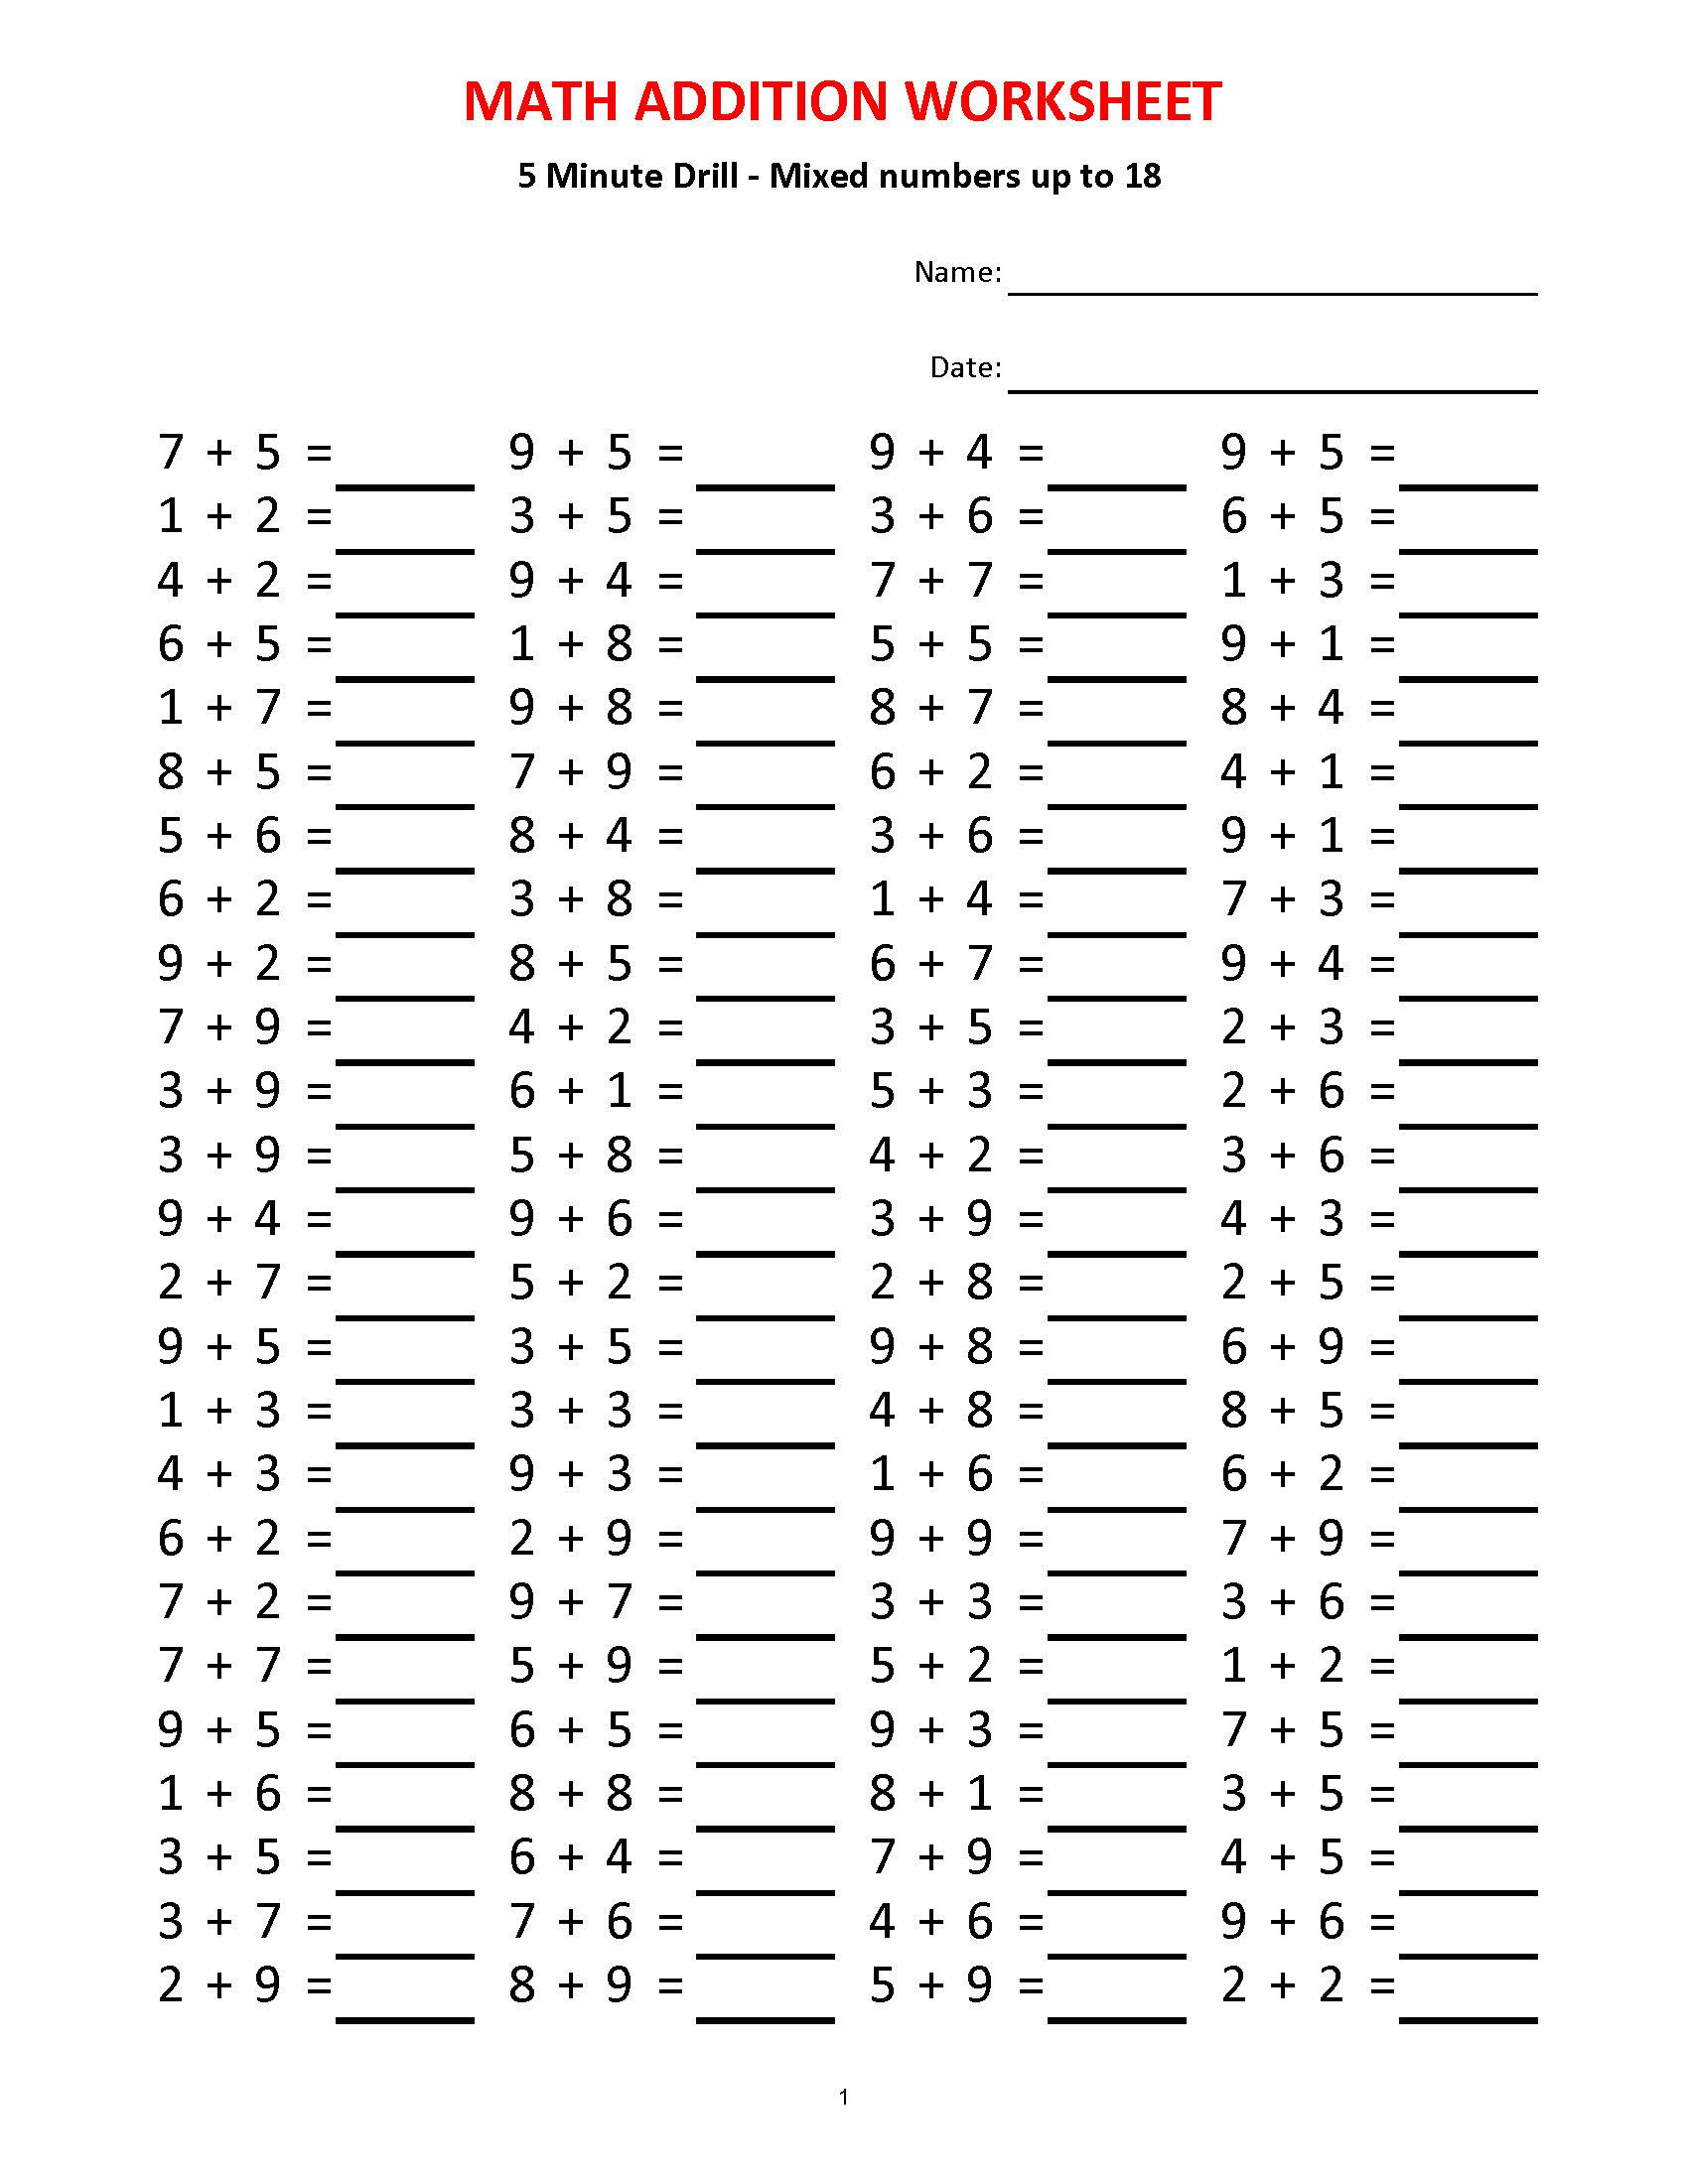 Addition 5 Minute Drill H 10 Math Worksheets With | Etsy within Printable 5 Minute Multiplication Drill